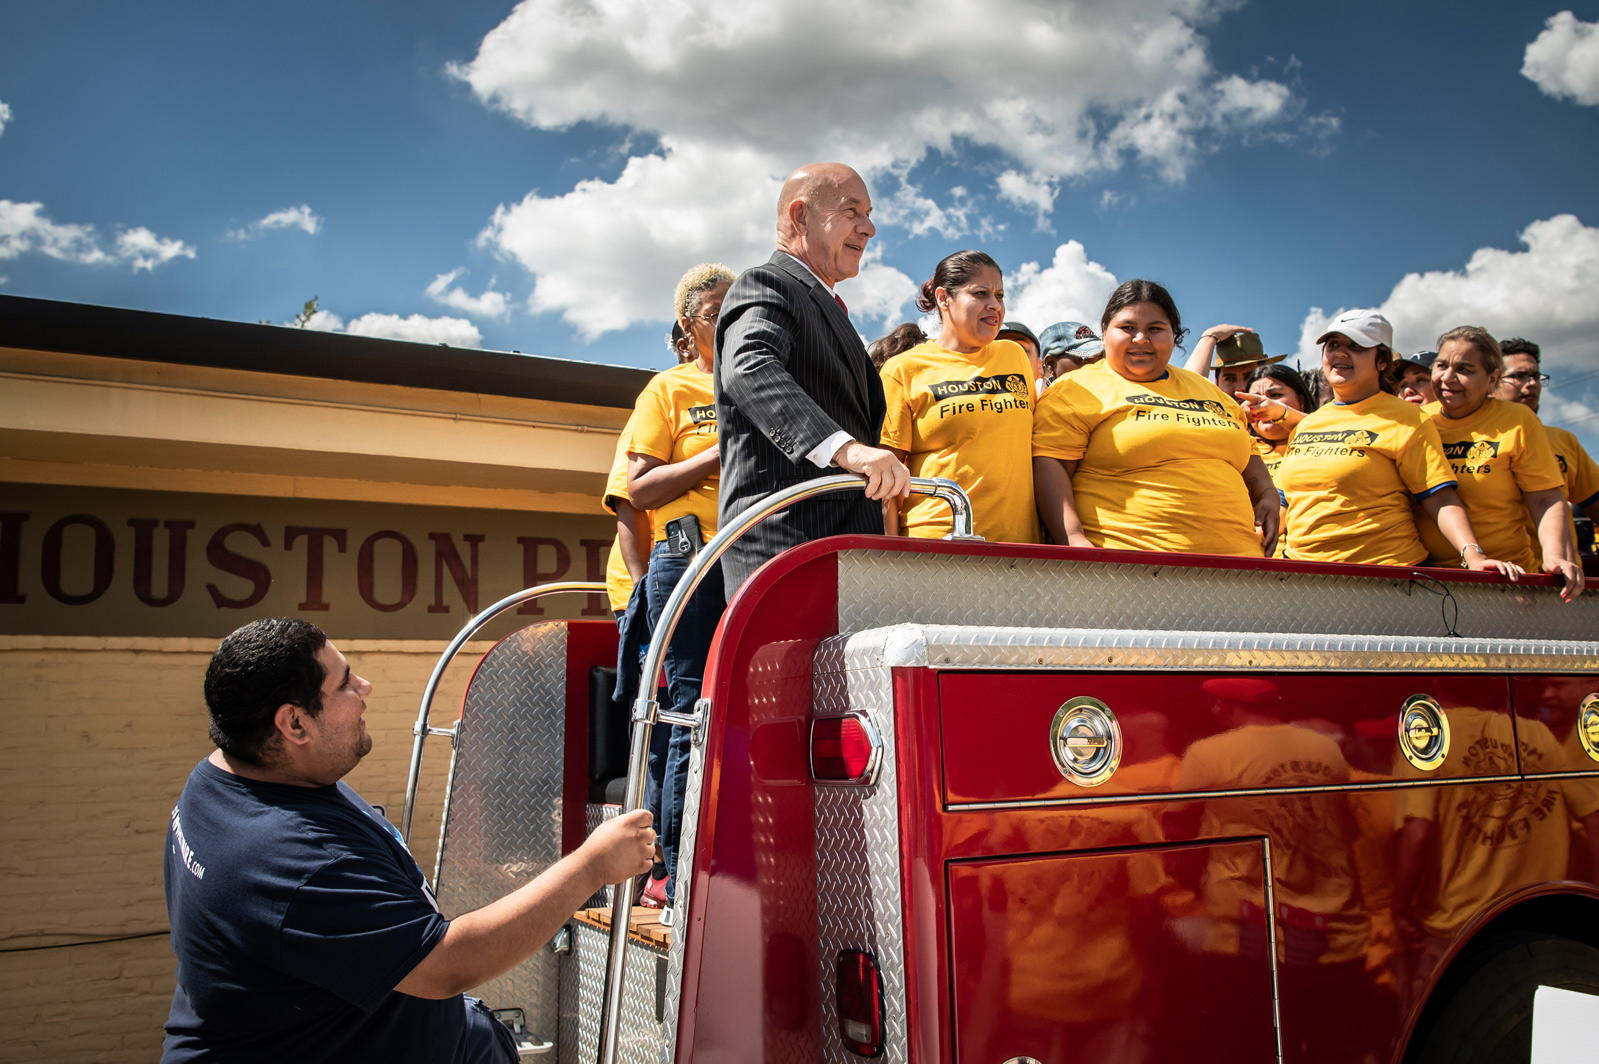 Firefighters from Houston and around the state formally endorsed Senator John Whitmire’s candidacy for Houston mayor at an event on September 30, 2023 at Houston Professional Fire Fighters Association Local #341 in Houston, Texas.